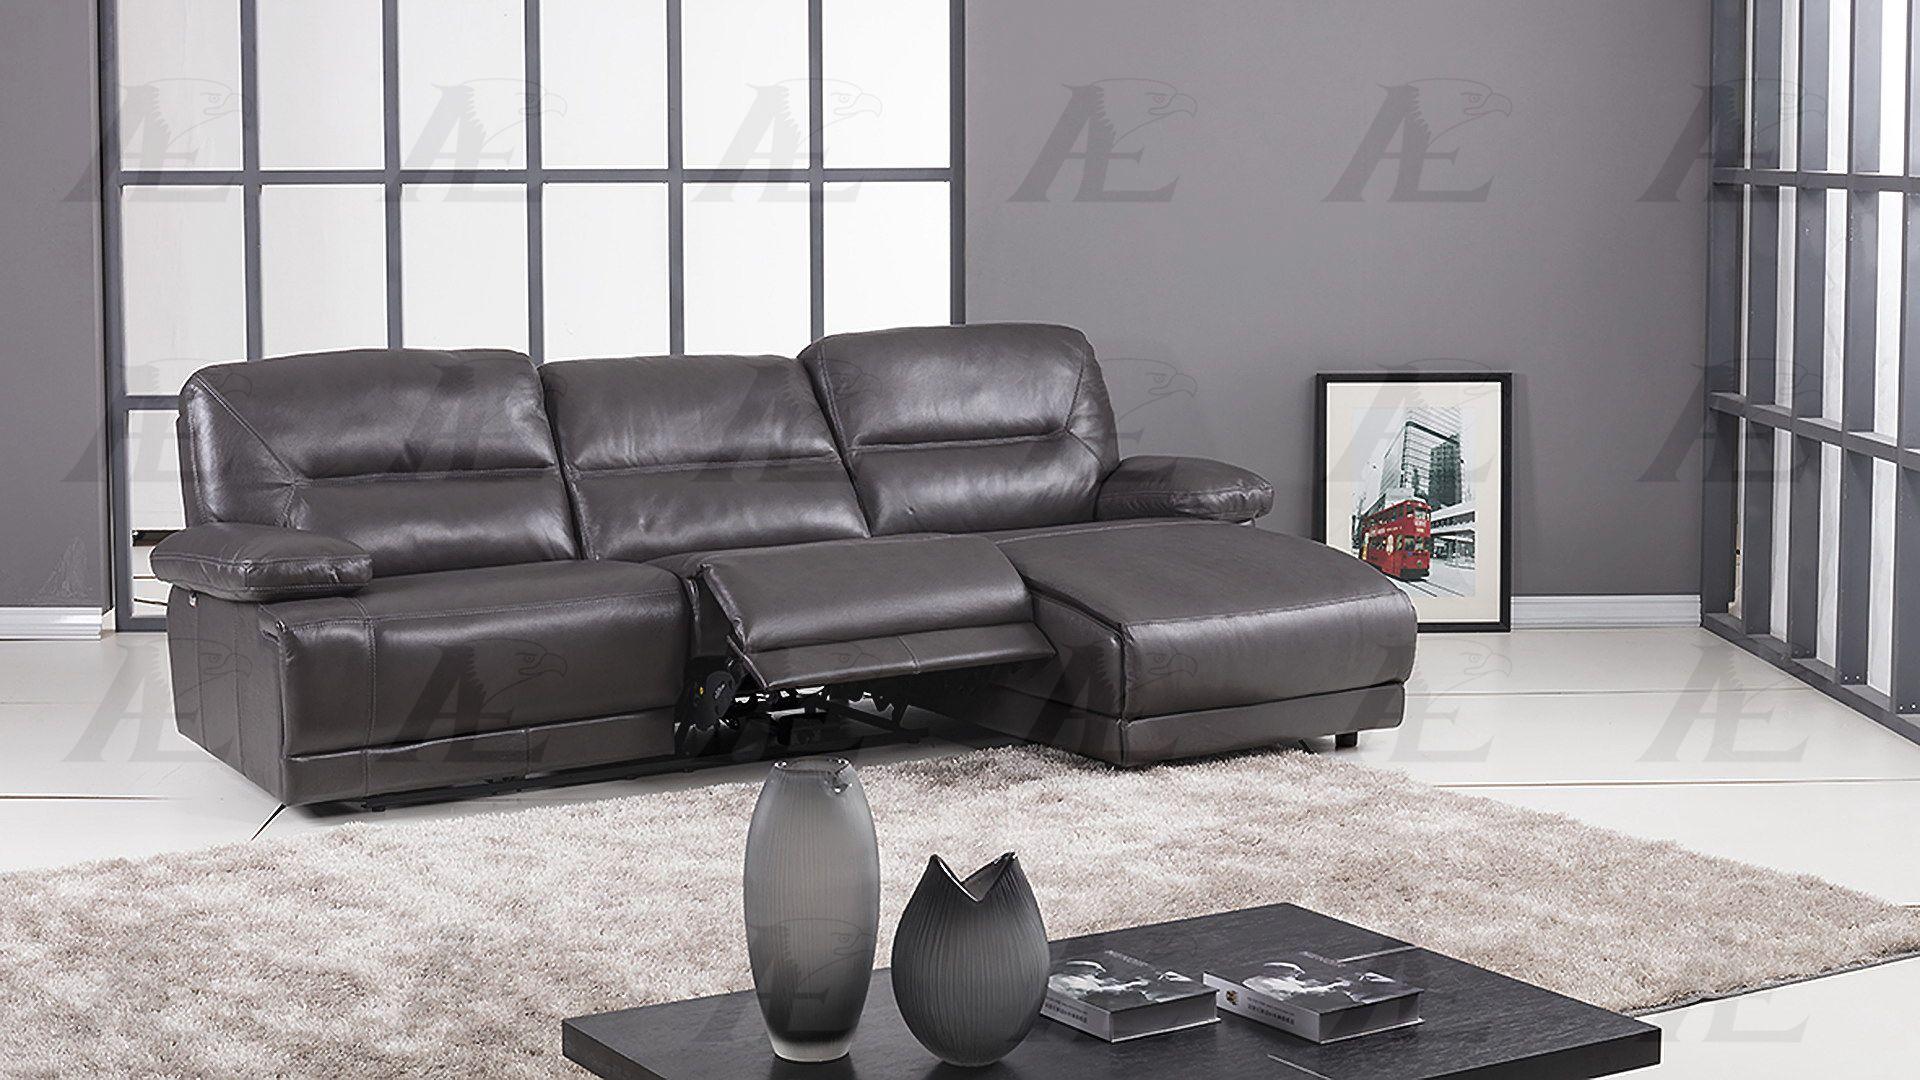 

    
American Eagle Furniture EK-L079-DG Dark Gray Sectional Recliner Sofa Chaise Right Hand Chase LEATHER SPLIT 2Pcs
